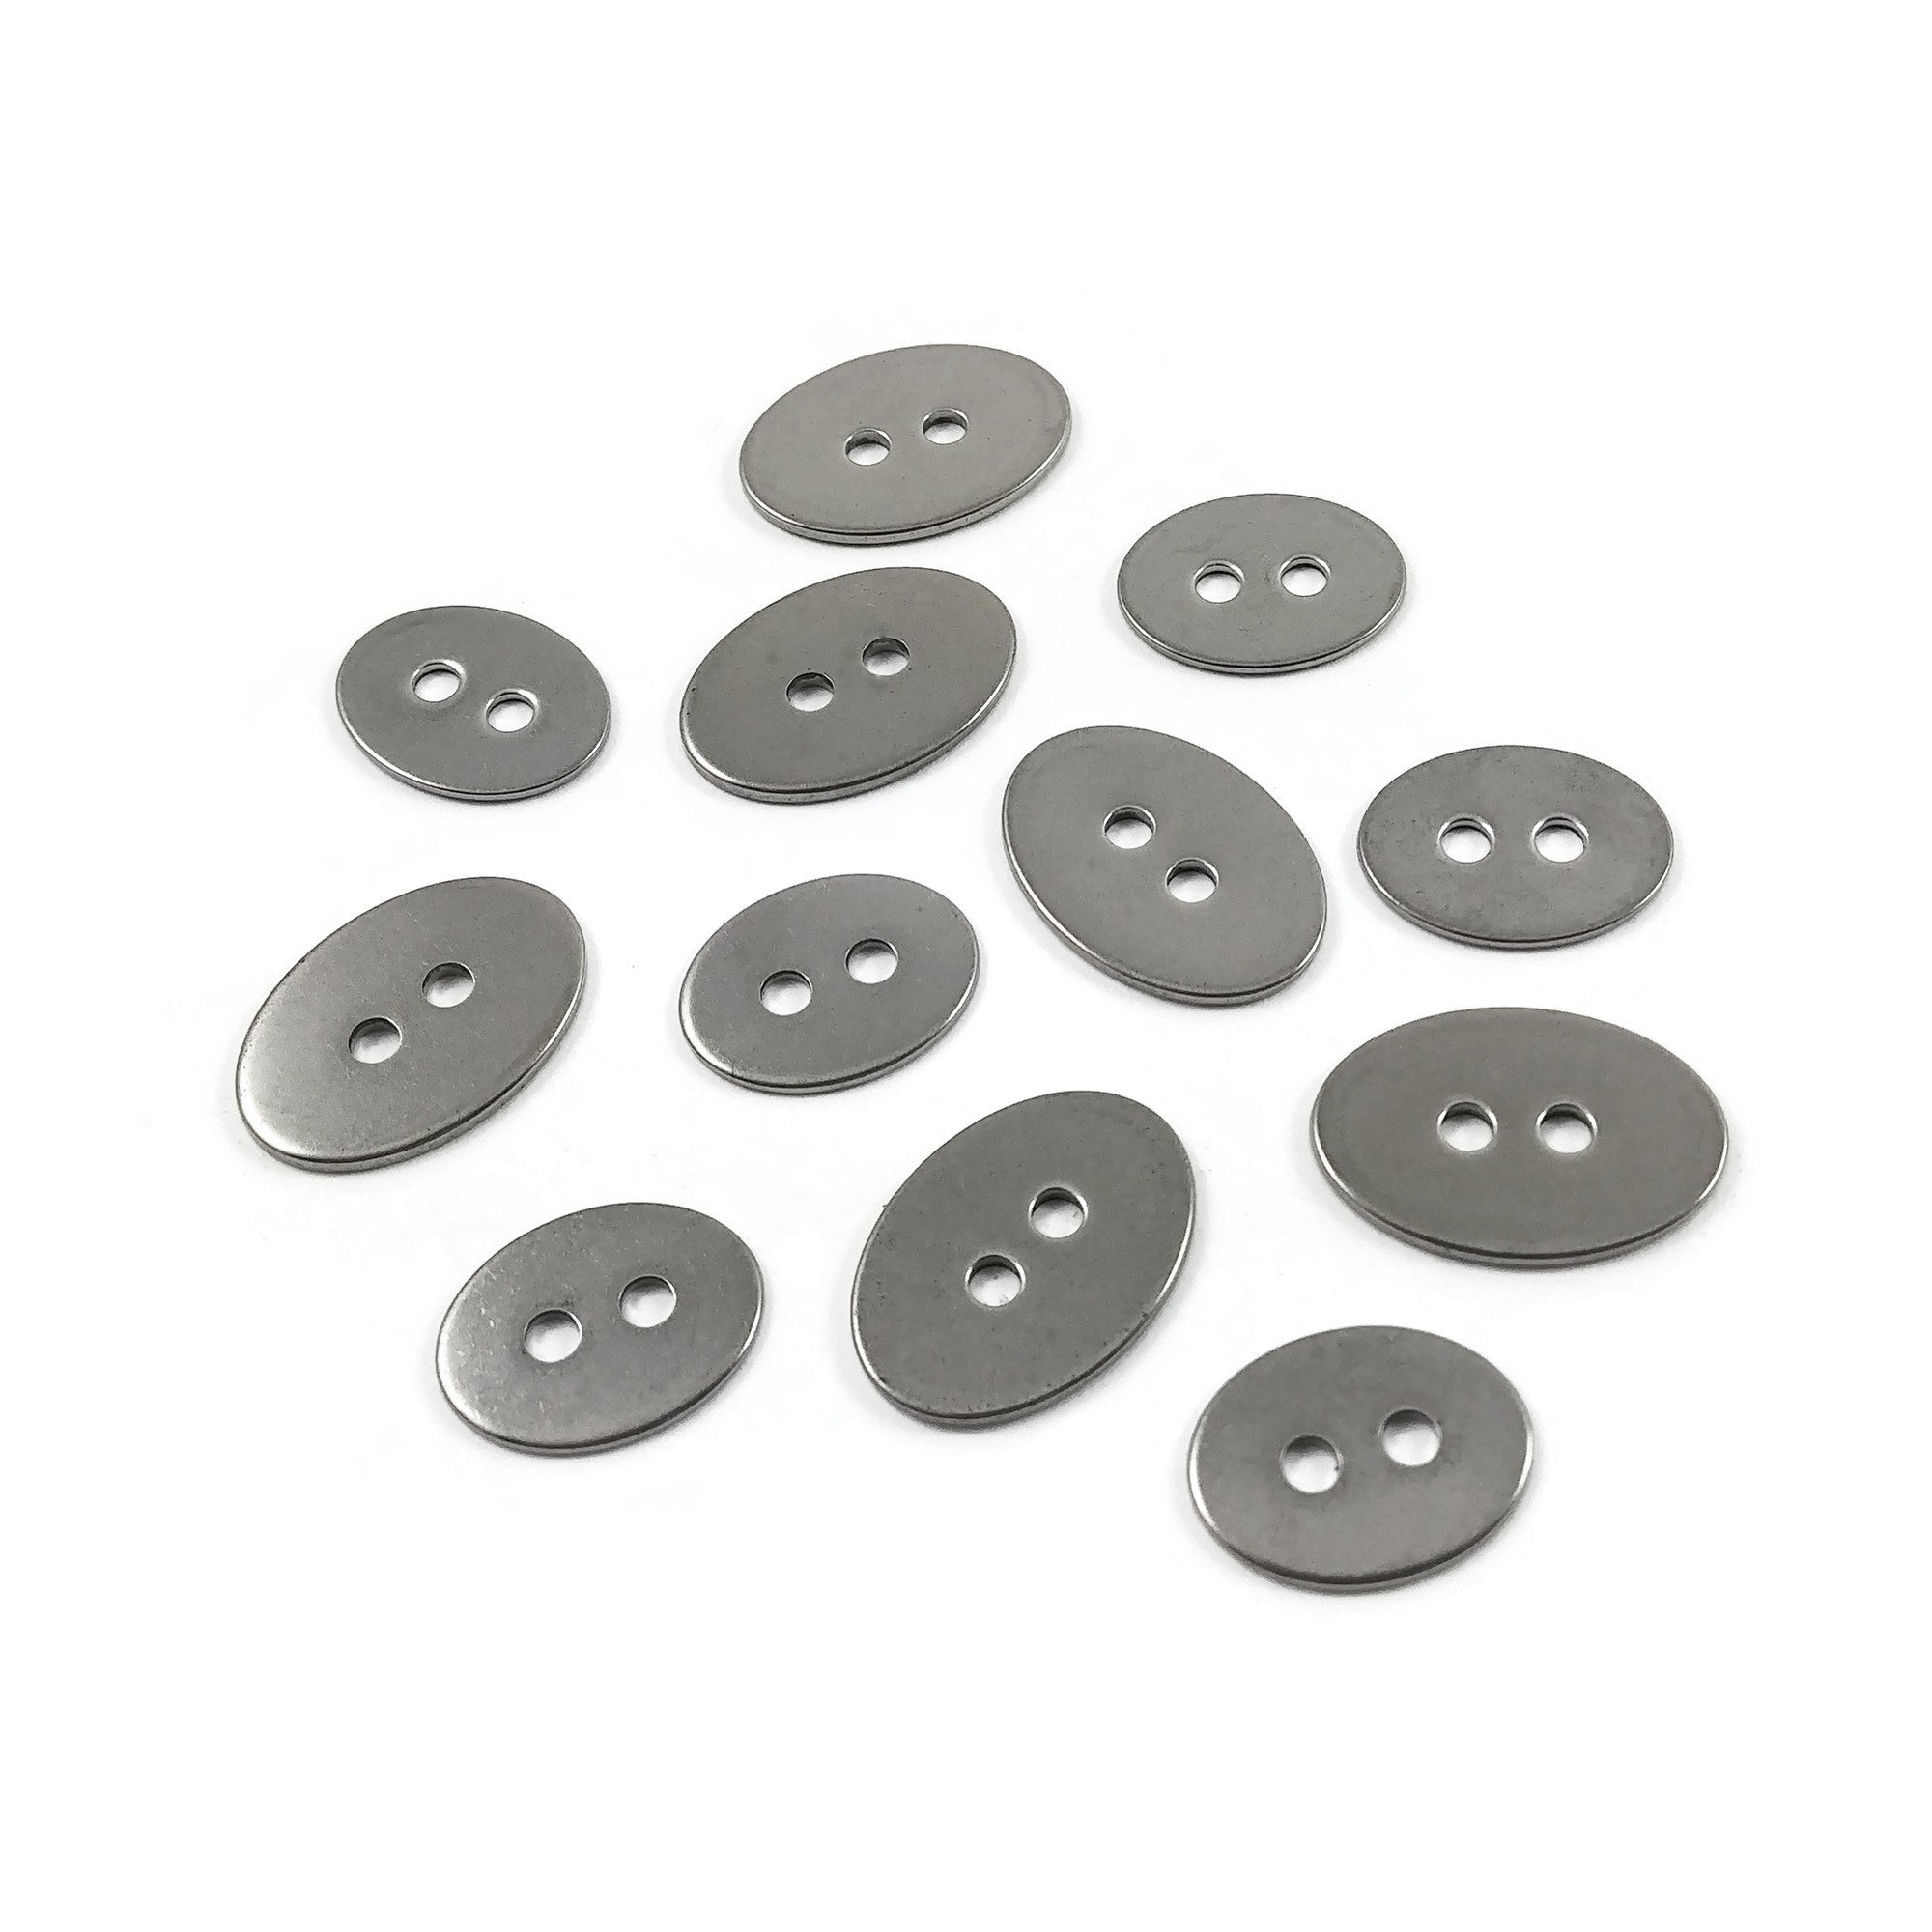 Silver stainless steel buttons or clasps, oval 14mm or 17mm